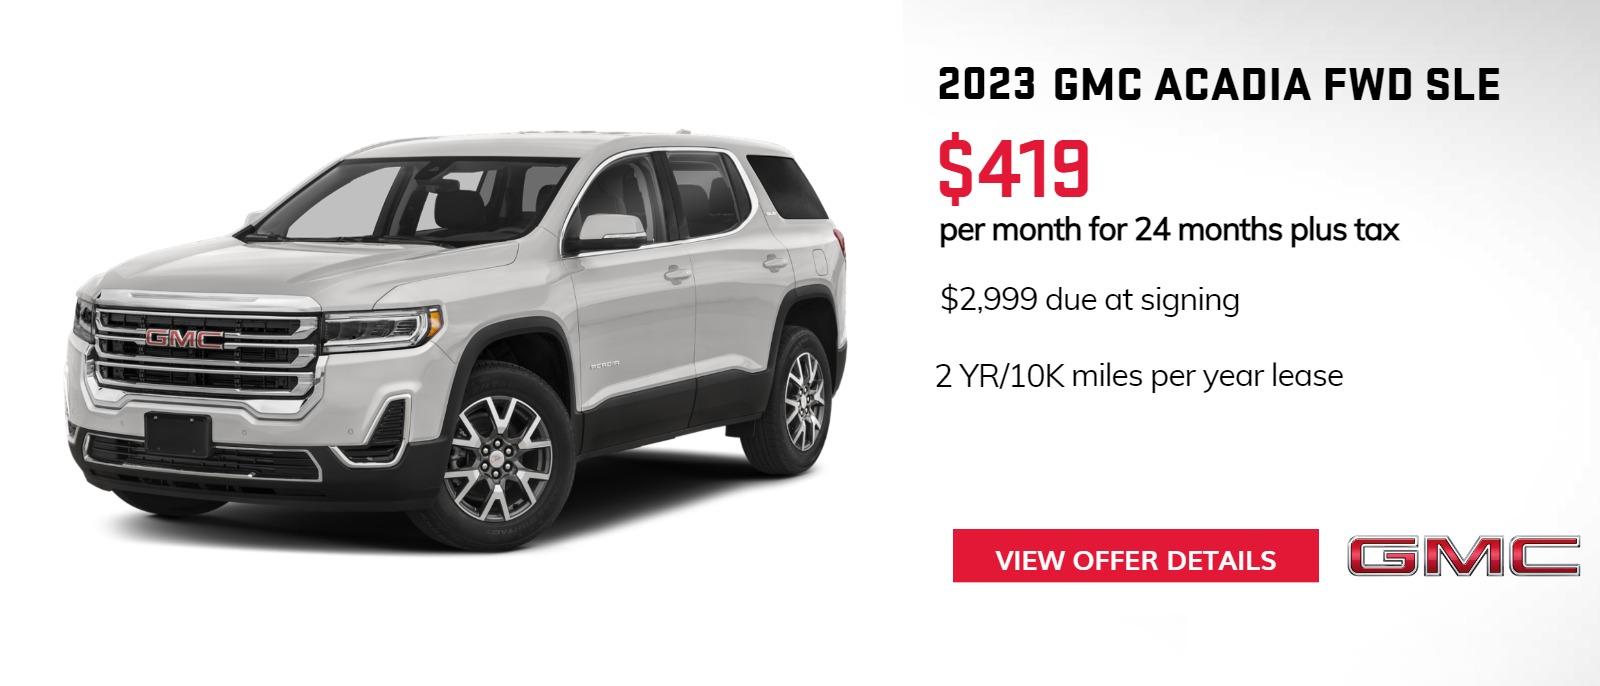 Acadia stock # PZ254609 2 yr / 10k miles per year lease, $2,999 due at sign, $419 plus tax

Disclaimer: must qualify for Buick/GMC lease loyalty for the deal.